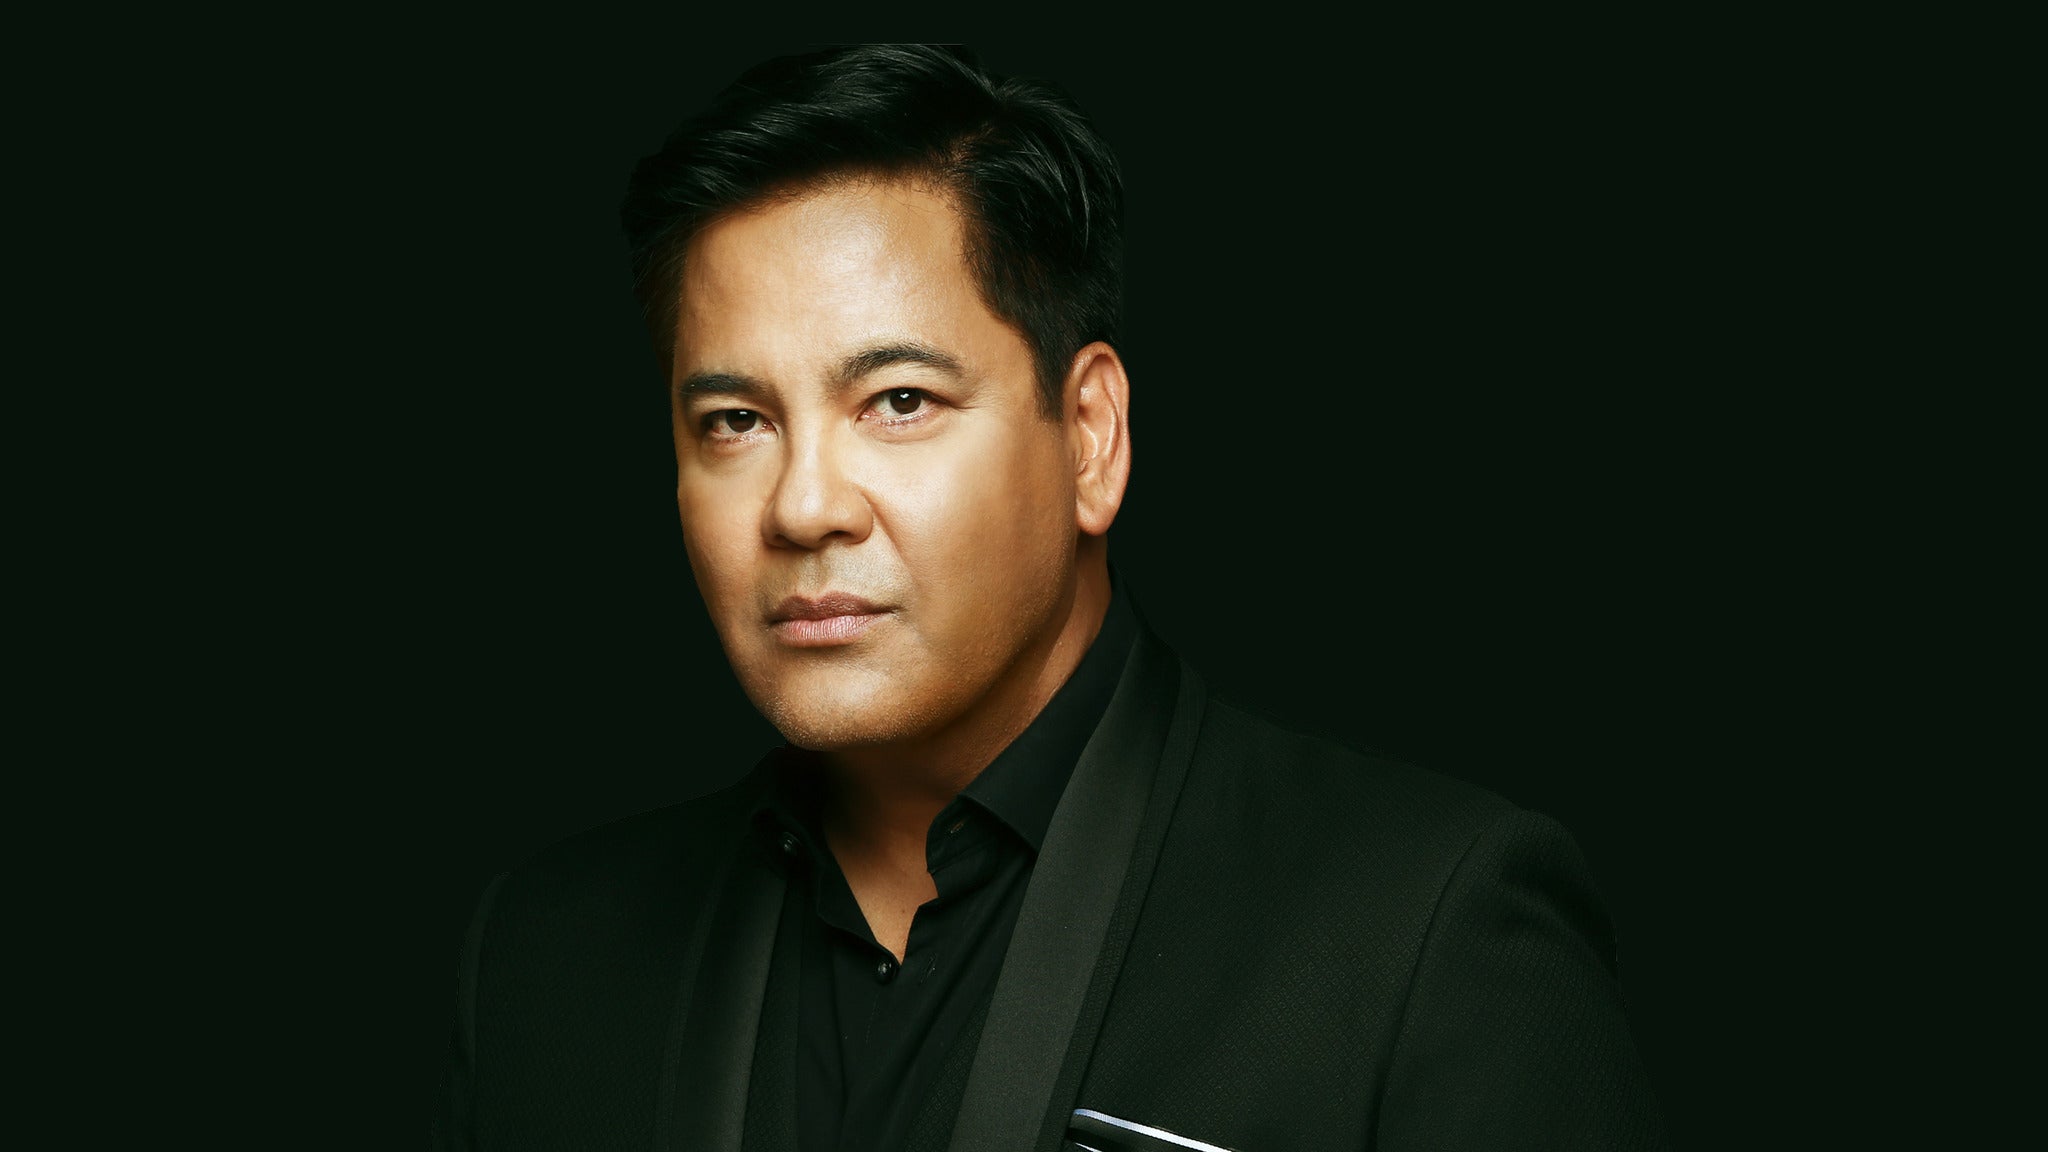 Martin Nievera and Pops Fernandez with special guest Robin Nievera in Henderson promo photo for Social Media presale offer code